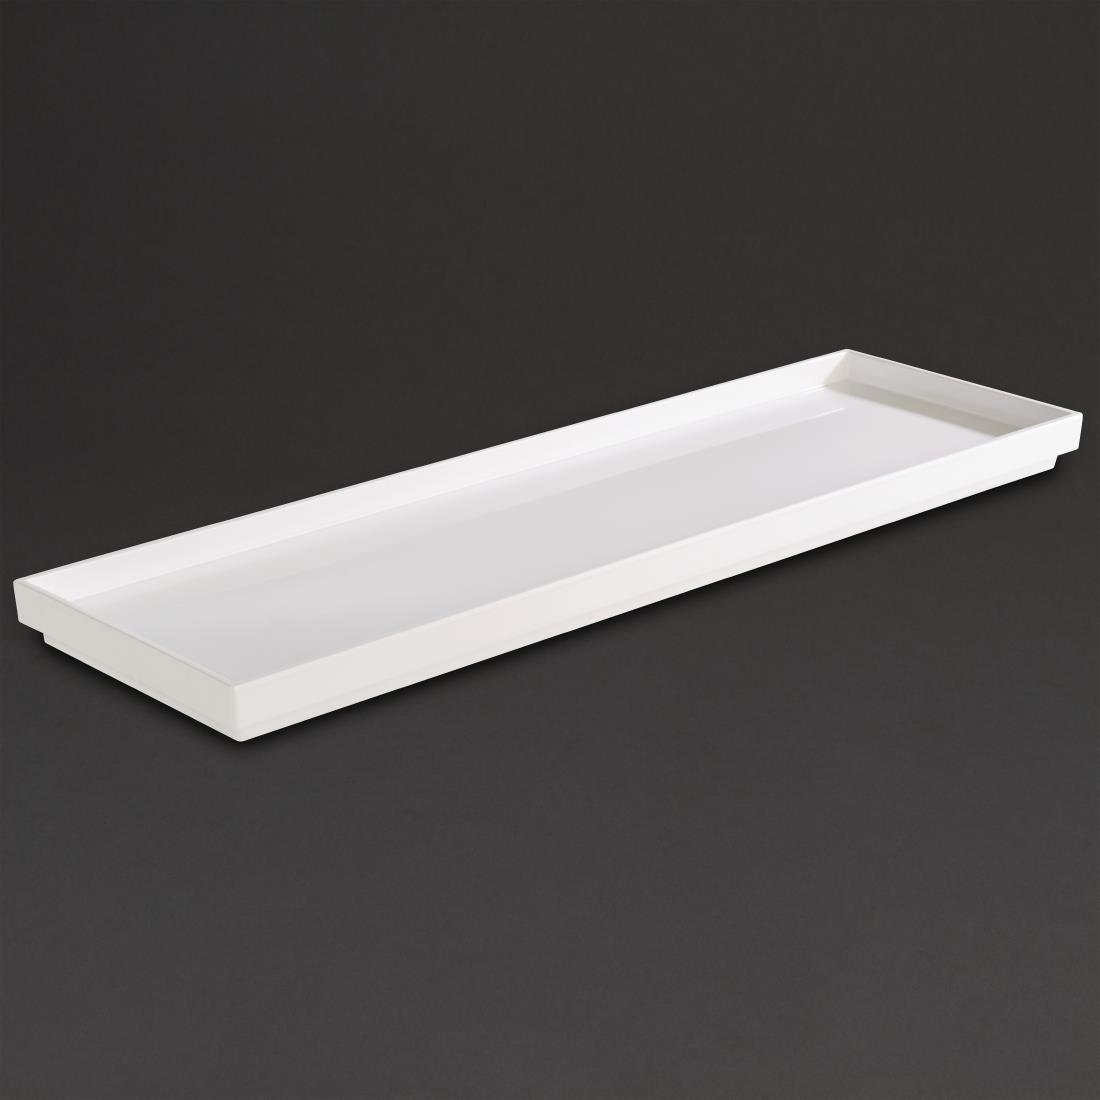 APS Asia+  White Tray GN 2/4 - Each - DT773 - 1